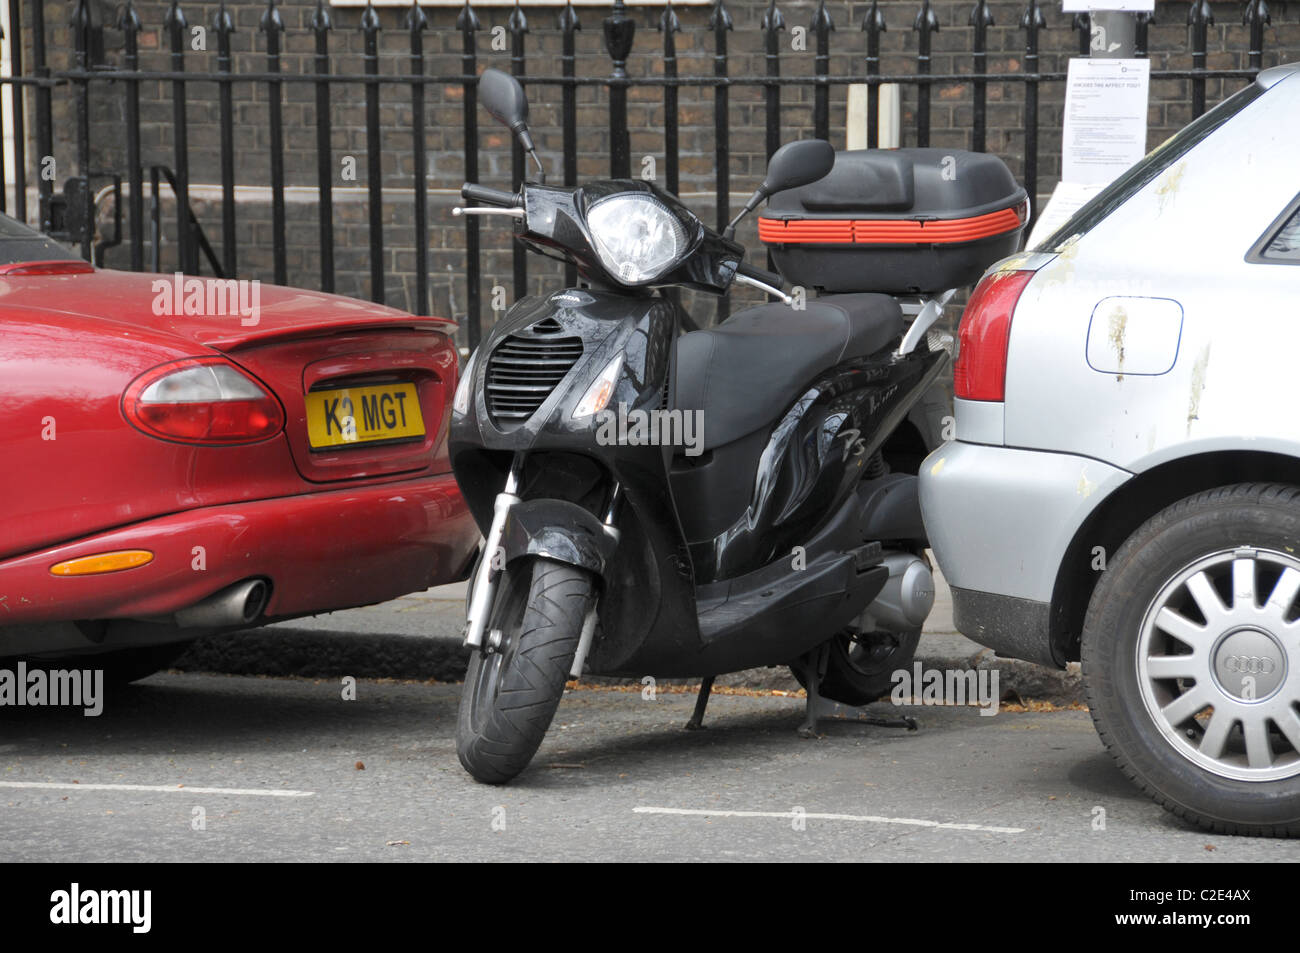 Scooter parked small gap cars parking space tight squeeze small economical travel commuting Stock Photo